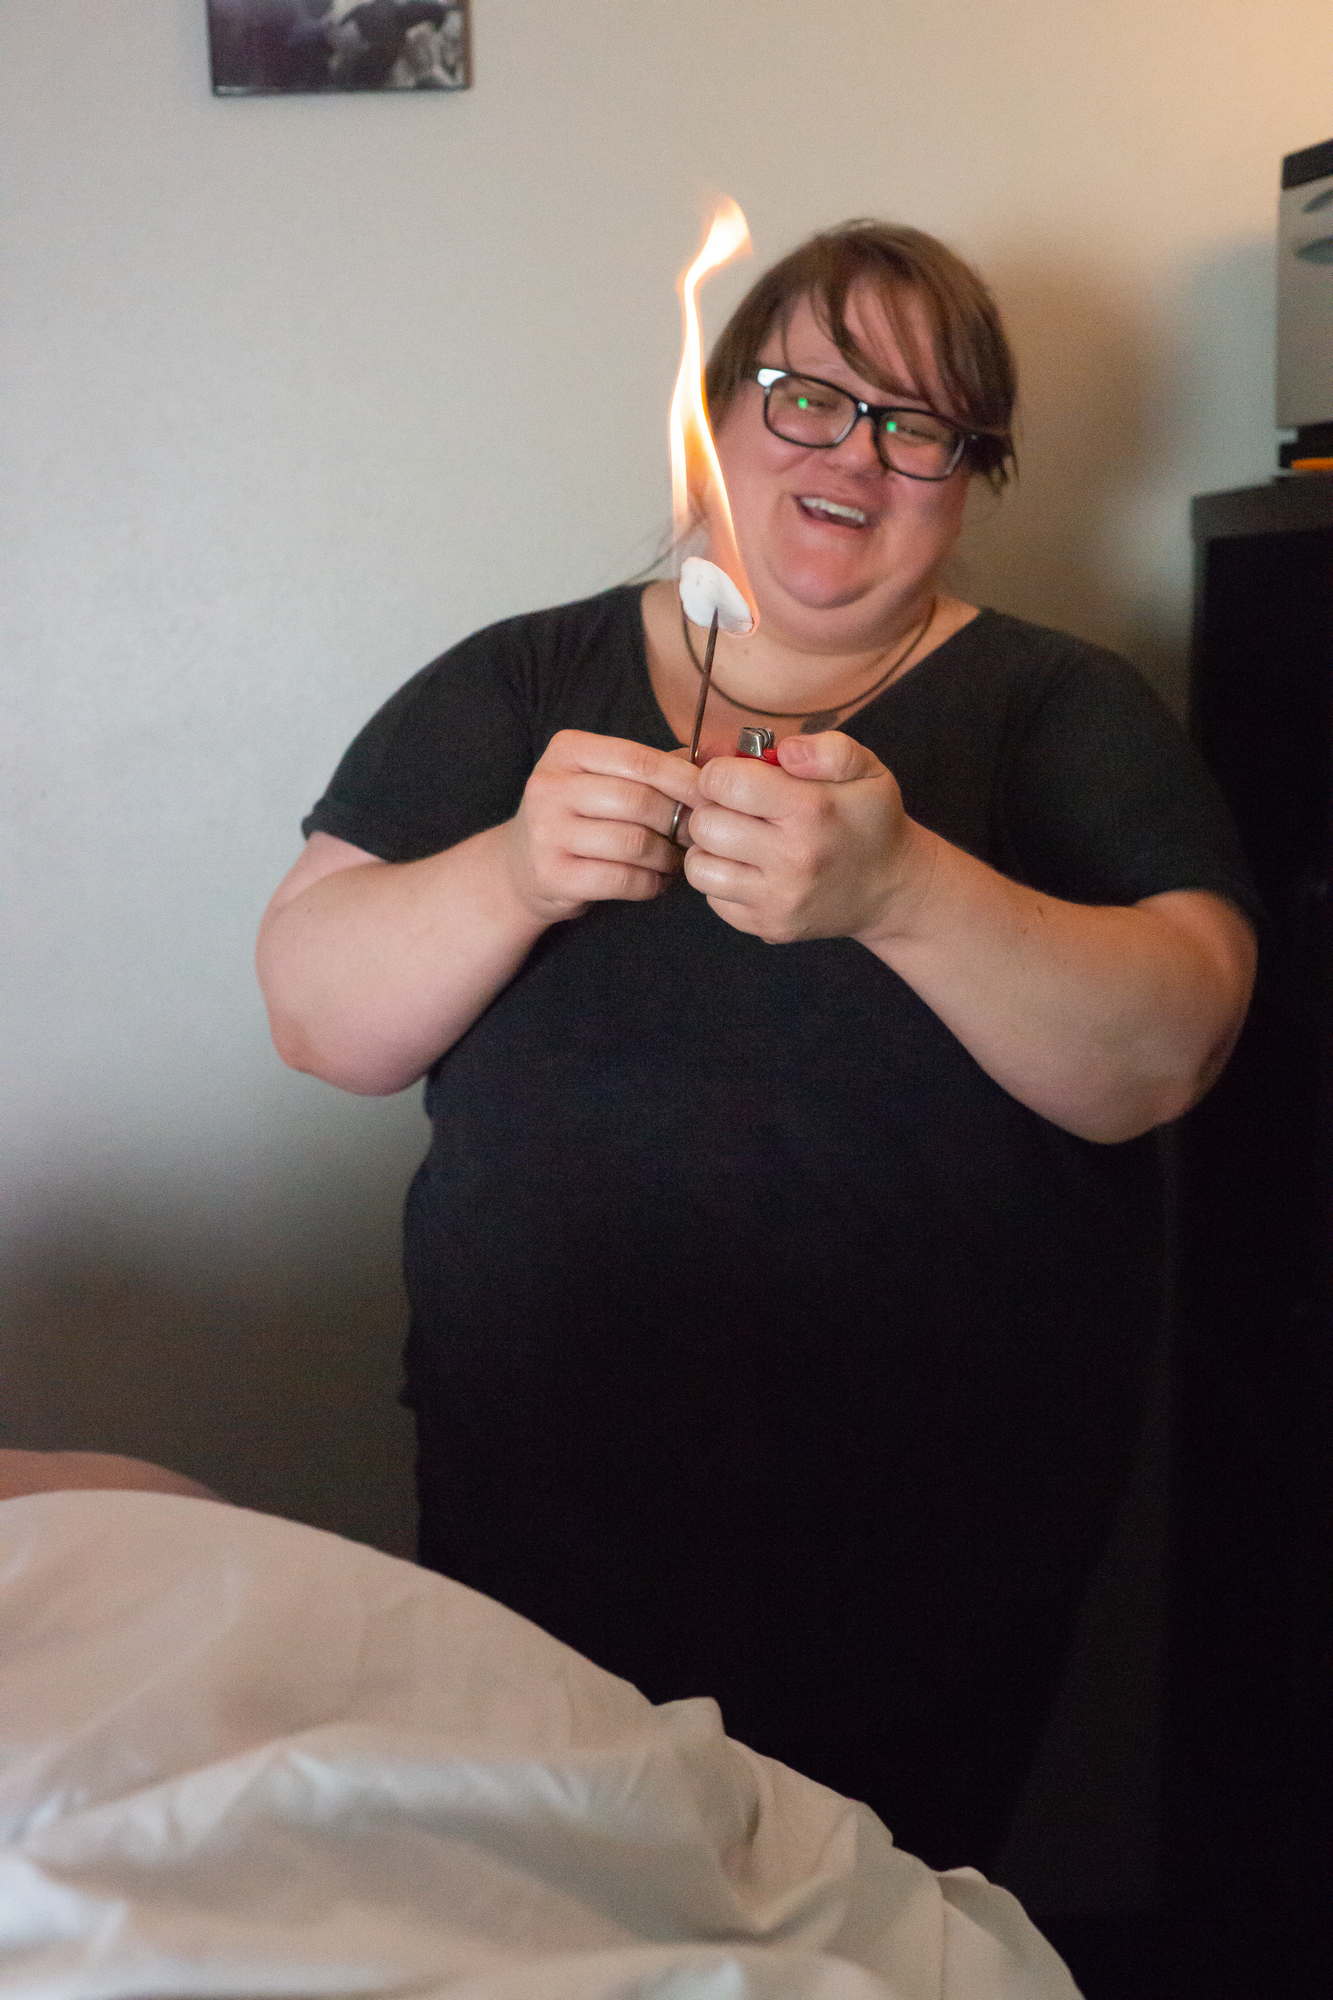 A fat woman smiles while she lights a piece of cotton aflame